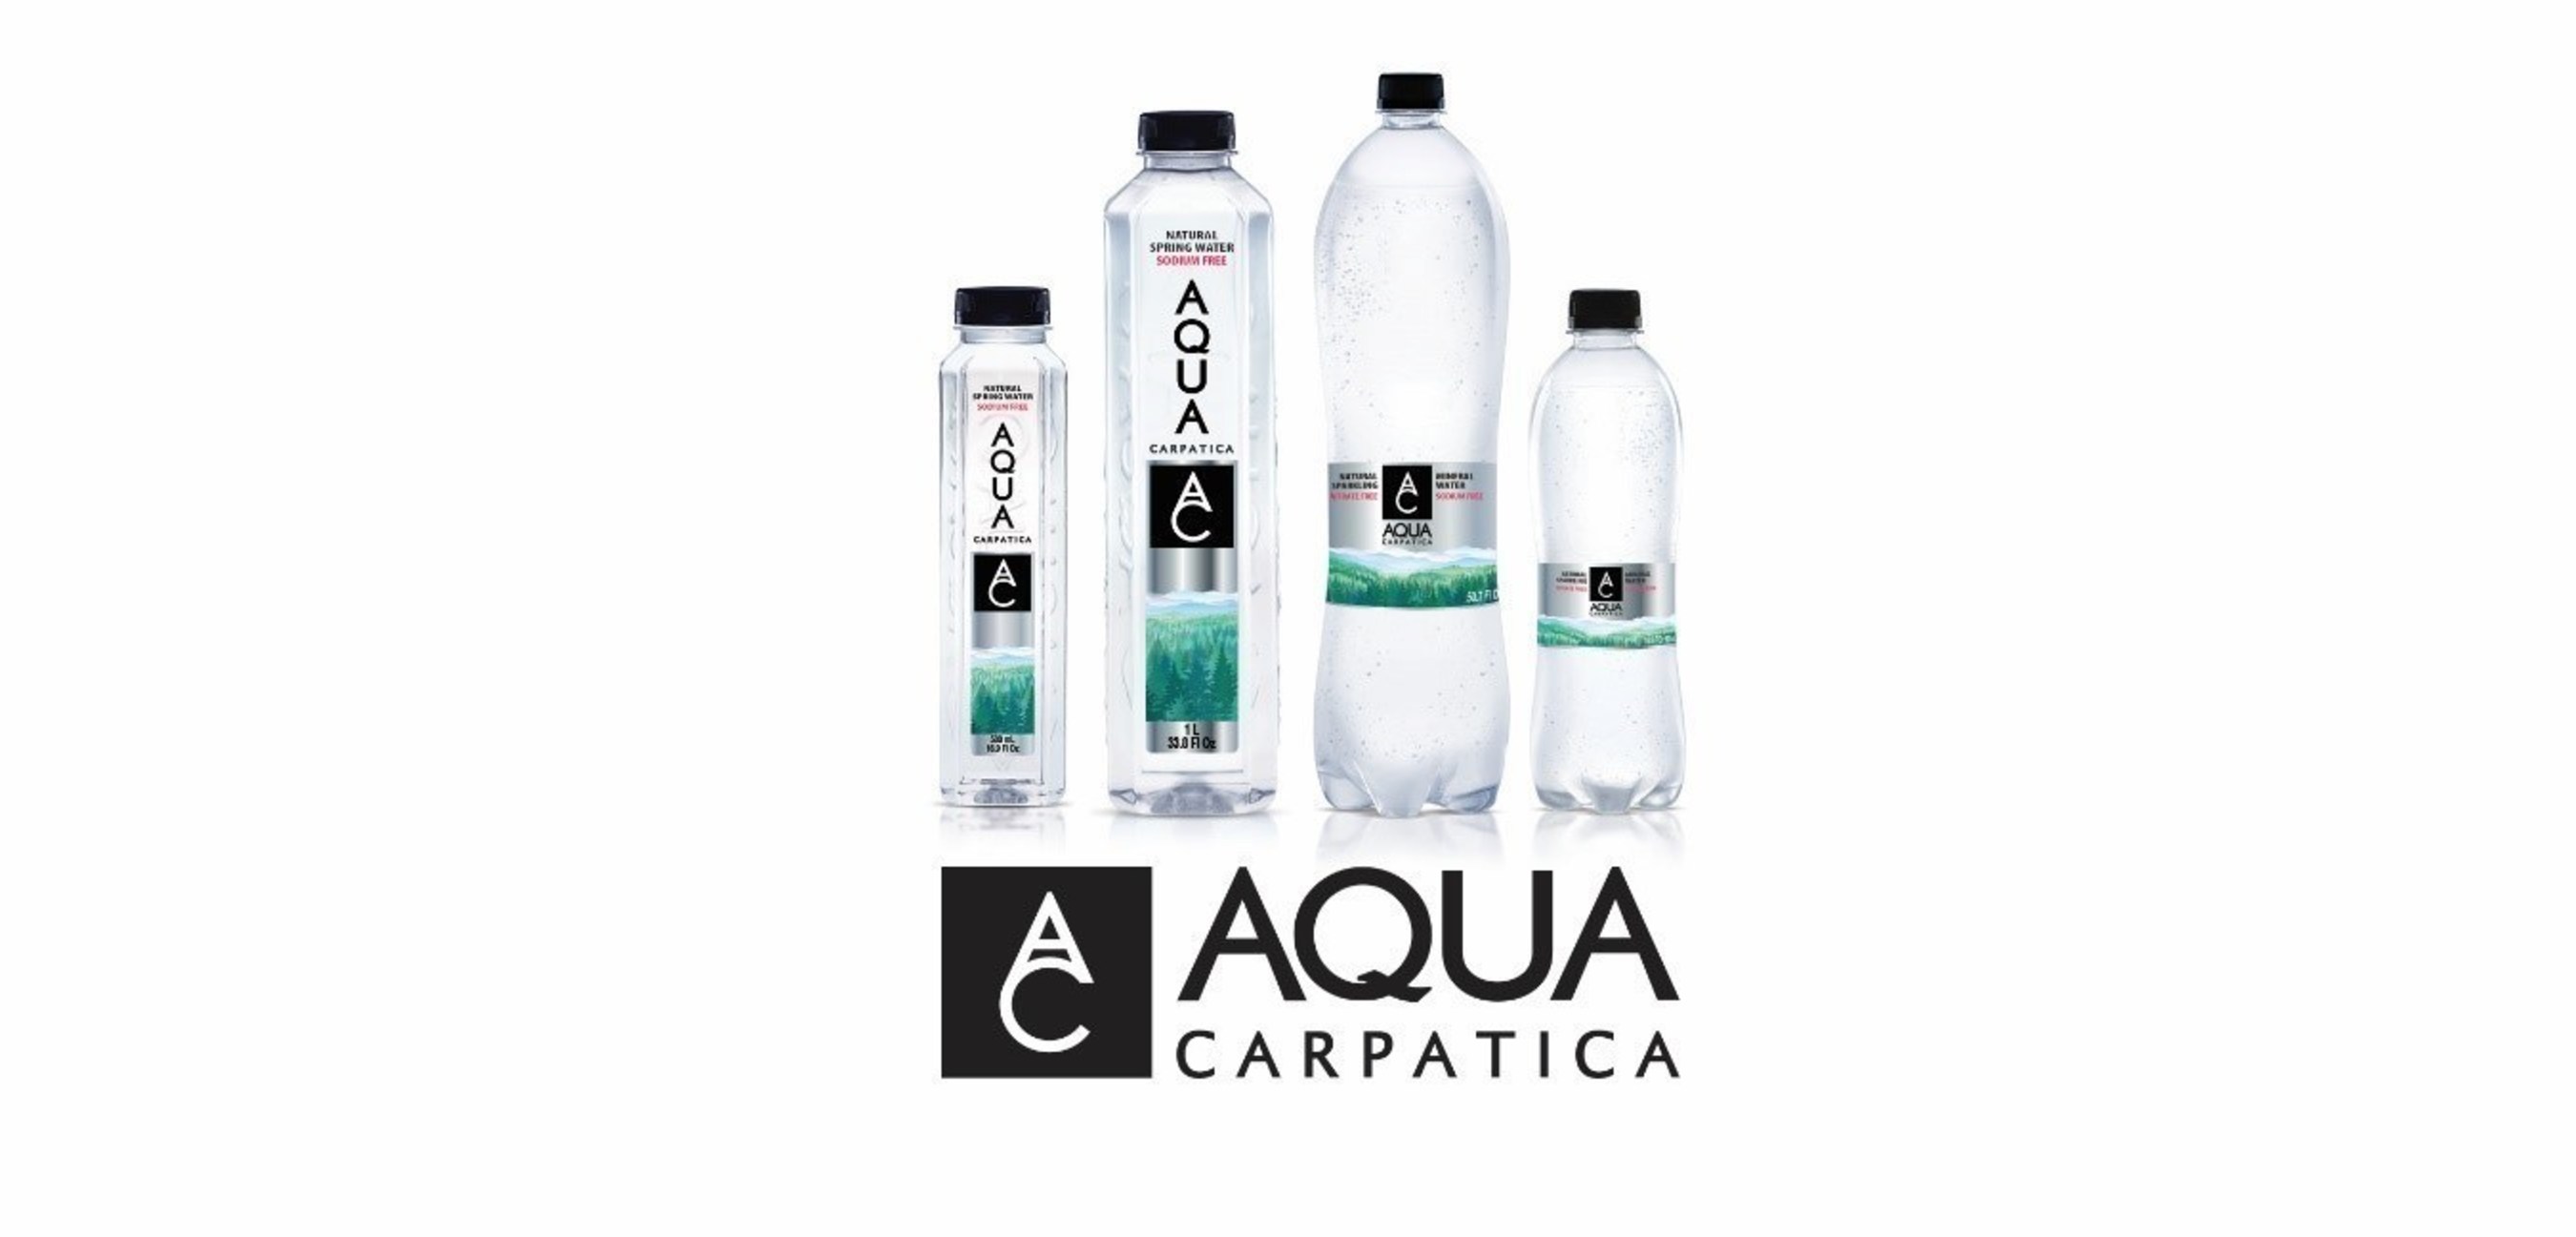 AQUA Carpatica Launches Nitrate-Free Waters at Whole Foods Market Stores